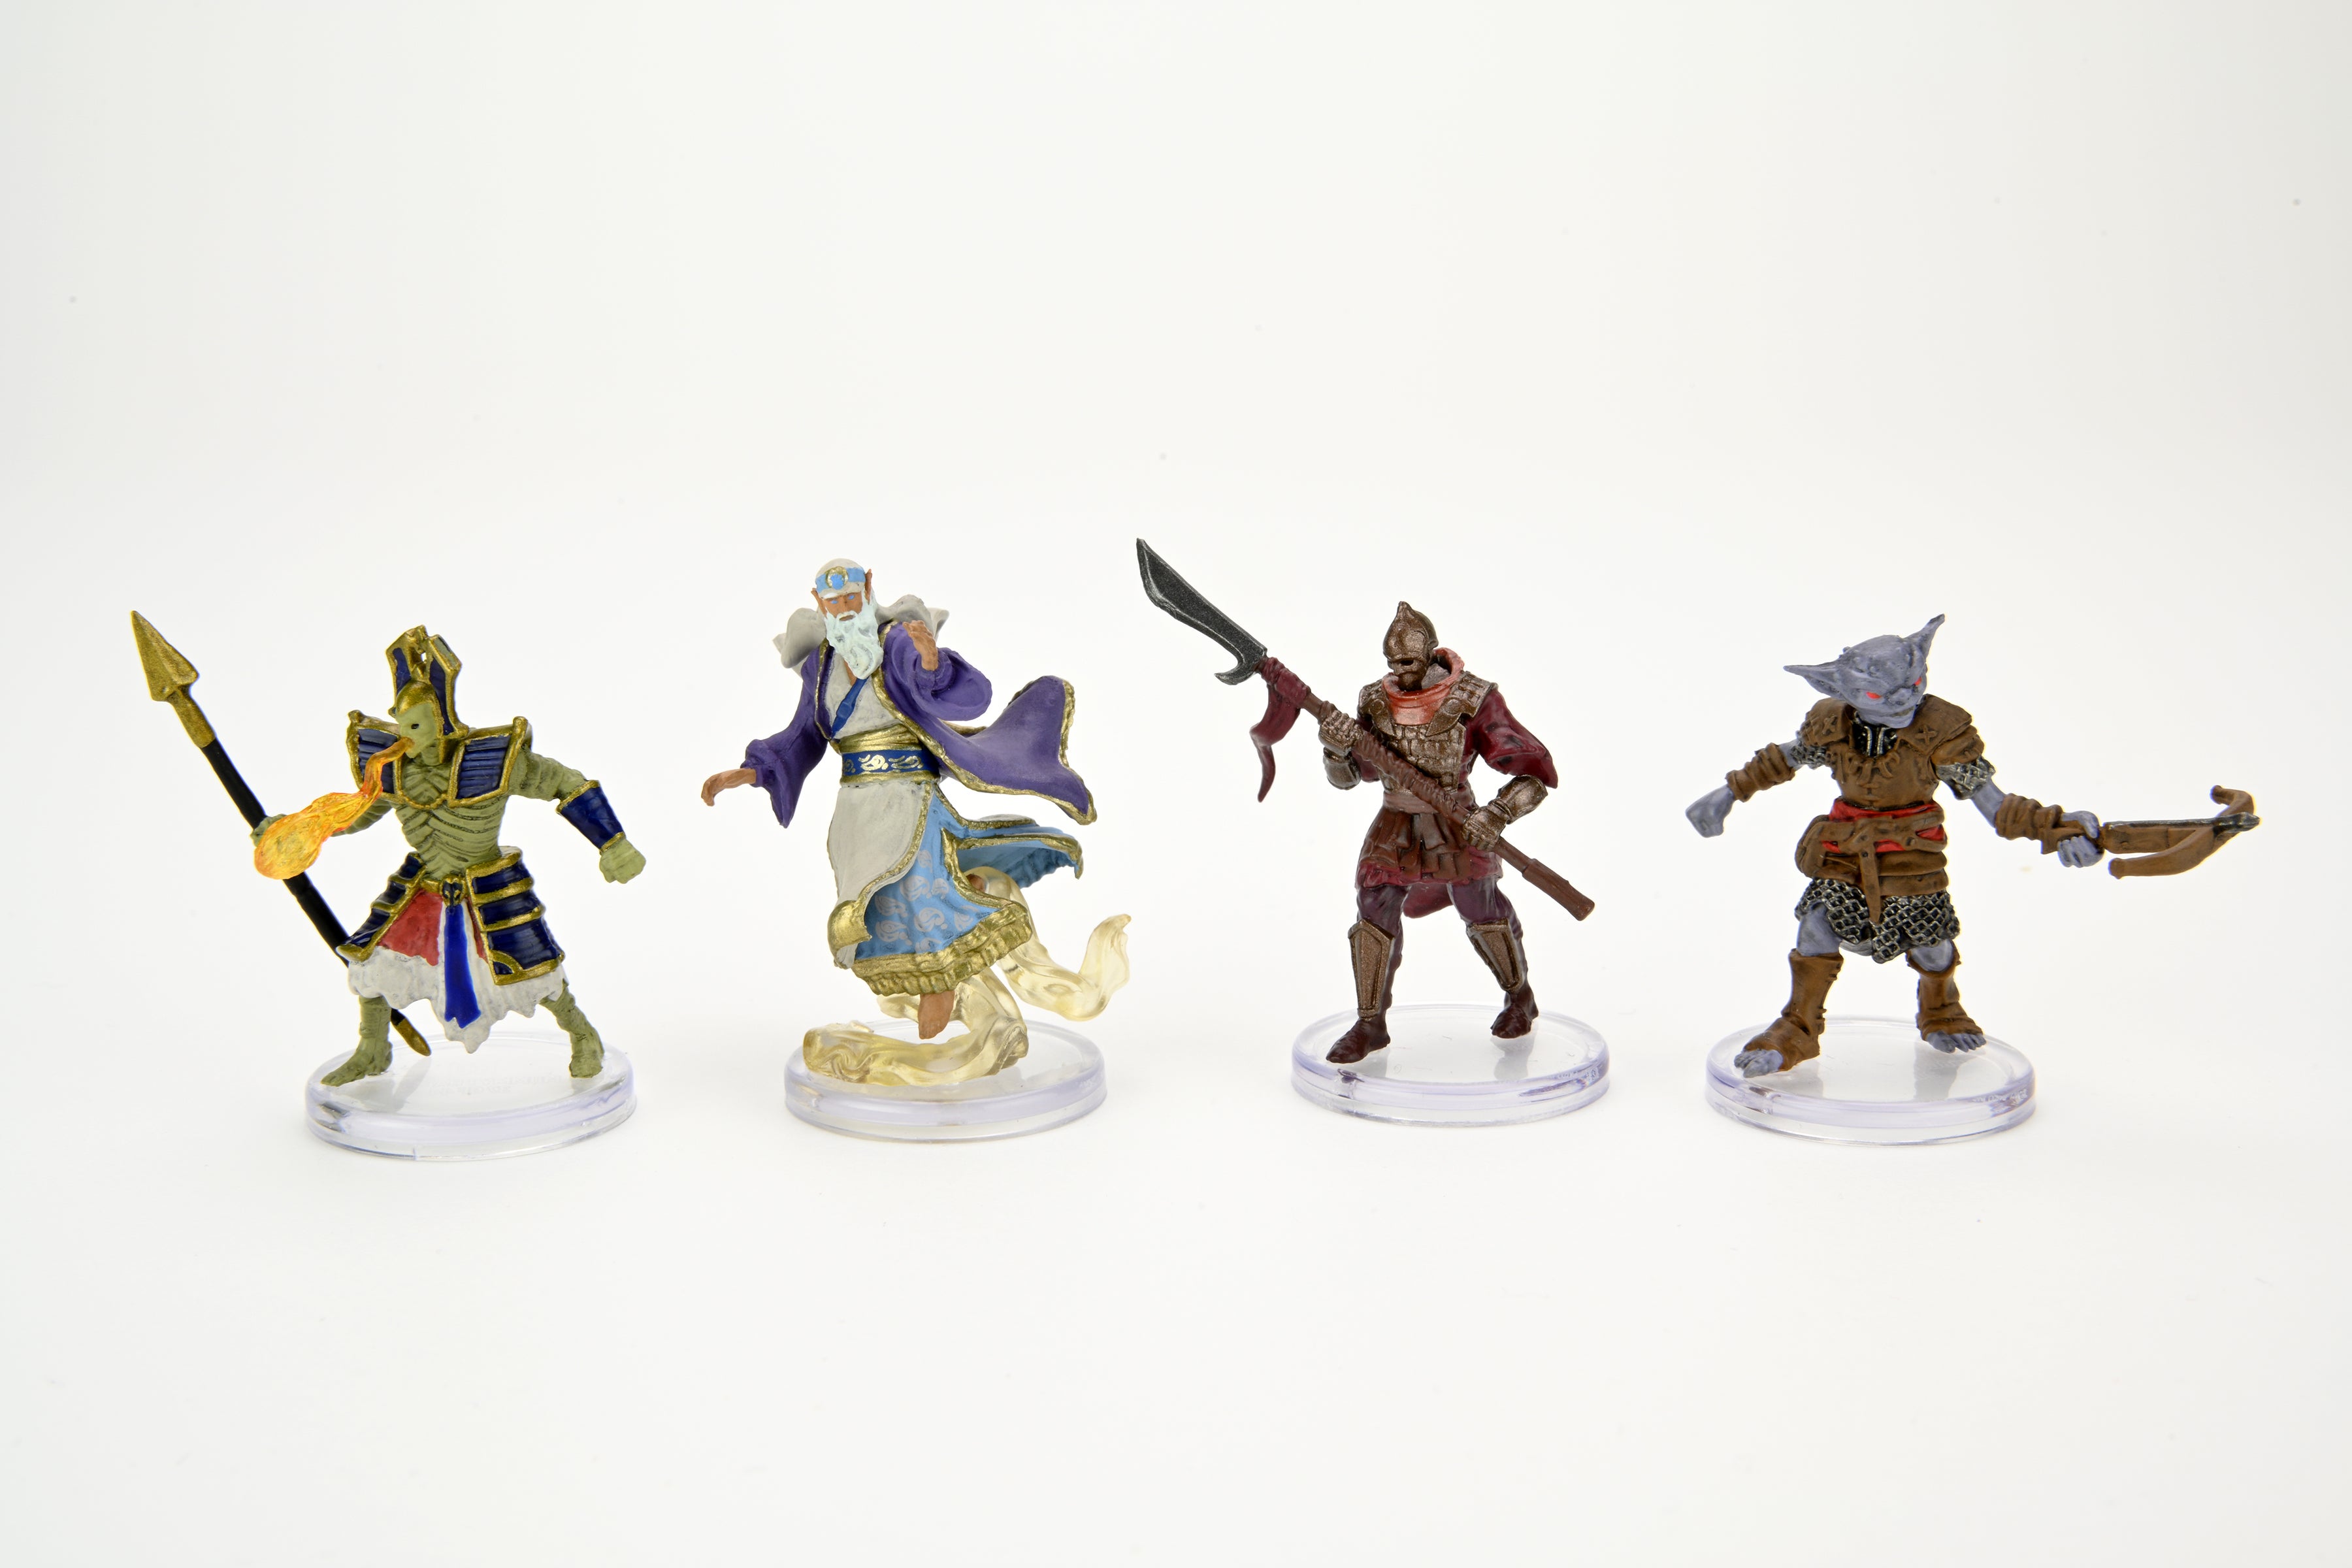 Sewer Scatter DnD Miniatures RPG Tabletop Miniatures Pathfinder Miniatures Resin Miniature Dungeons & Dragons Miniatures